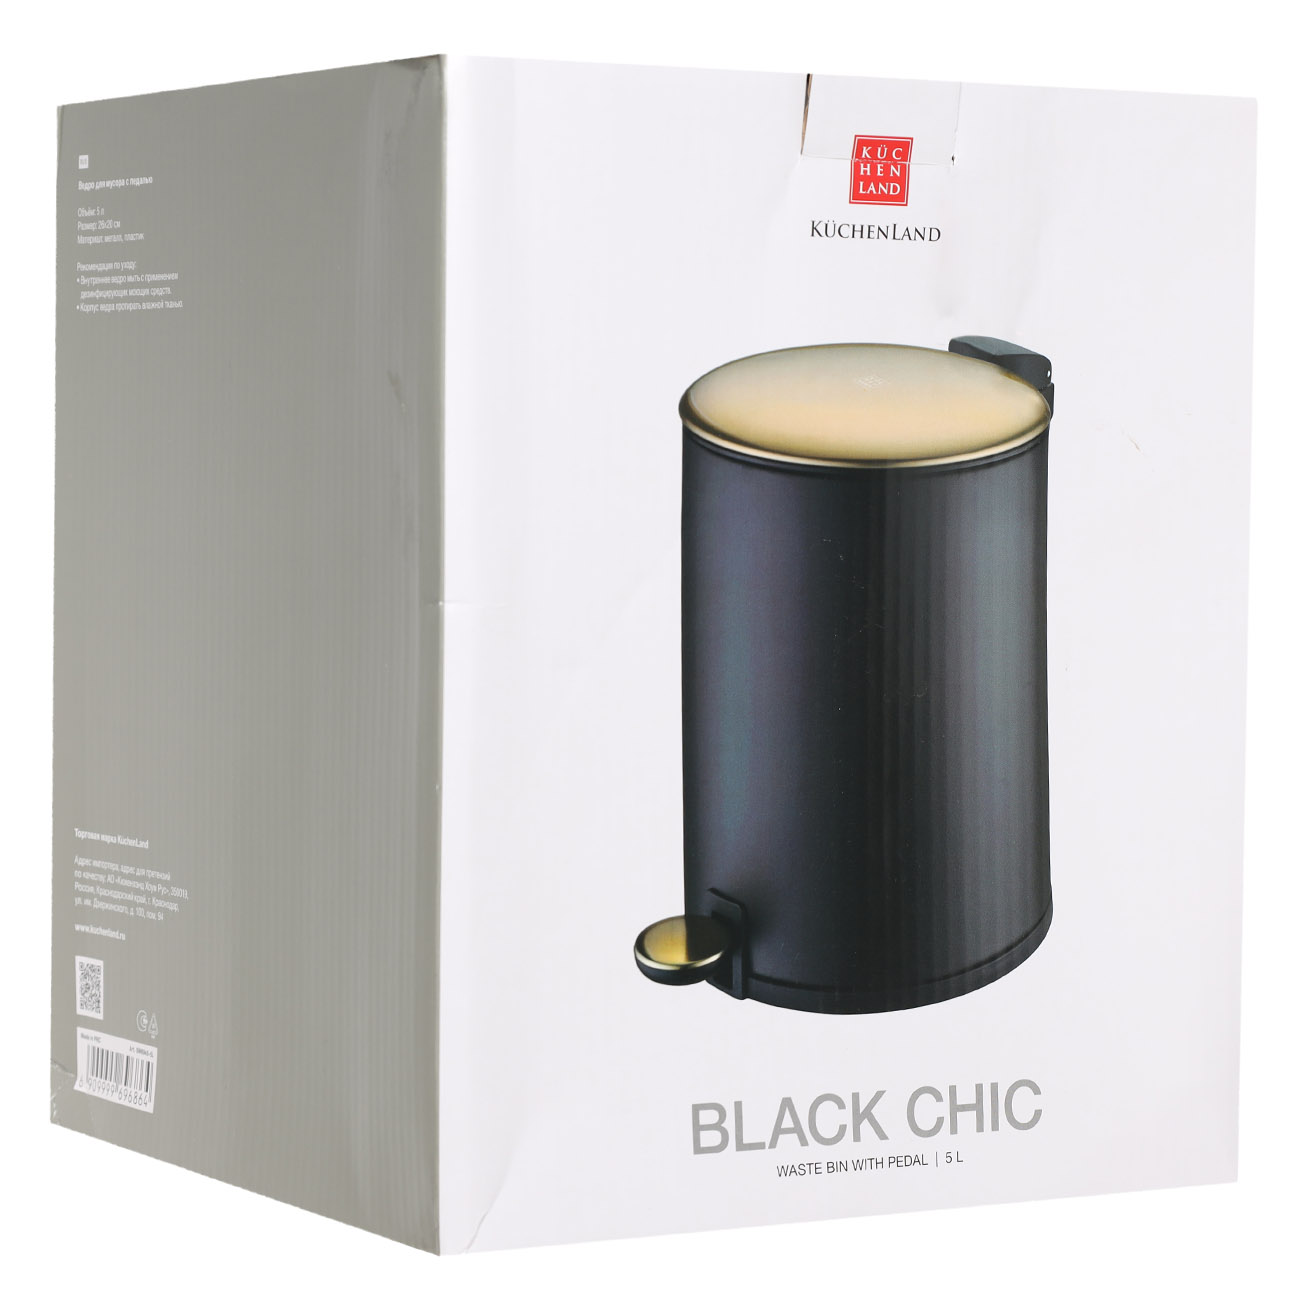 Waste container, 5 l, with pedal, metal, black and gold, Black chic изображение № 5